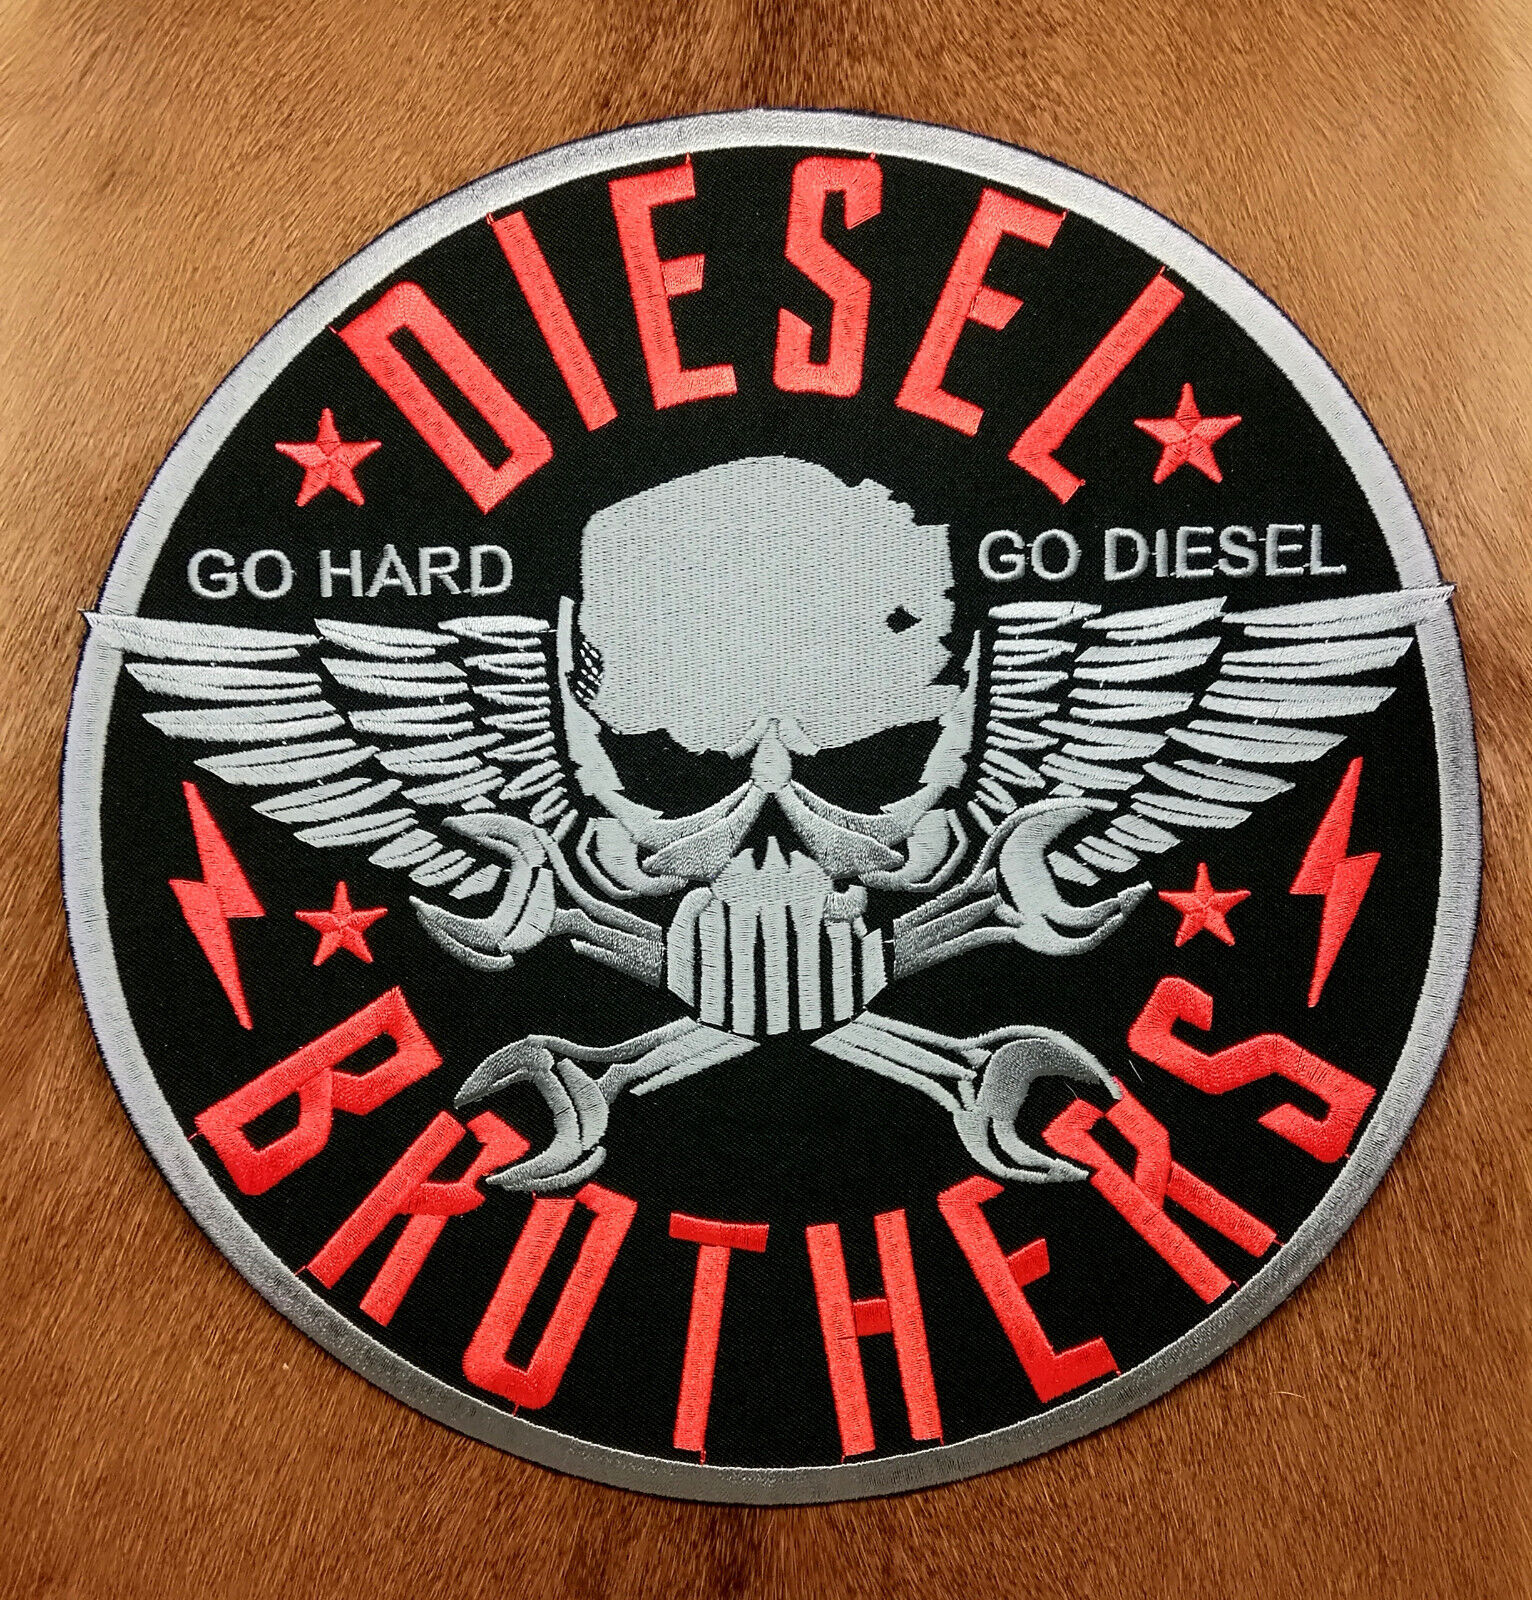 Skull Wing Diesel Brothers Garage Car Truck Patch Large Back Iron On Embroidered